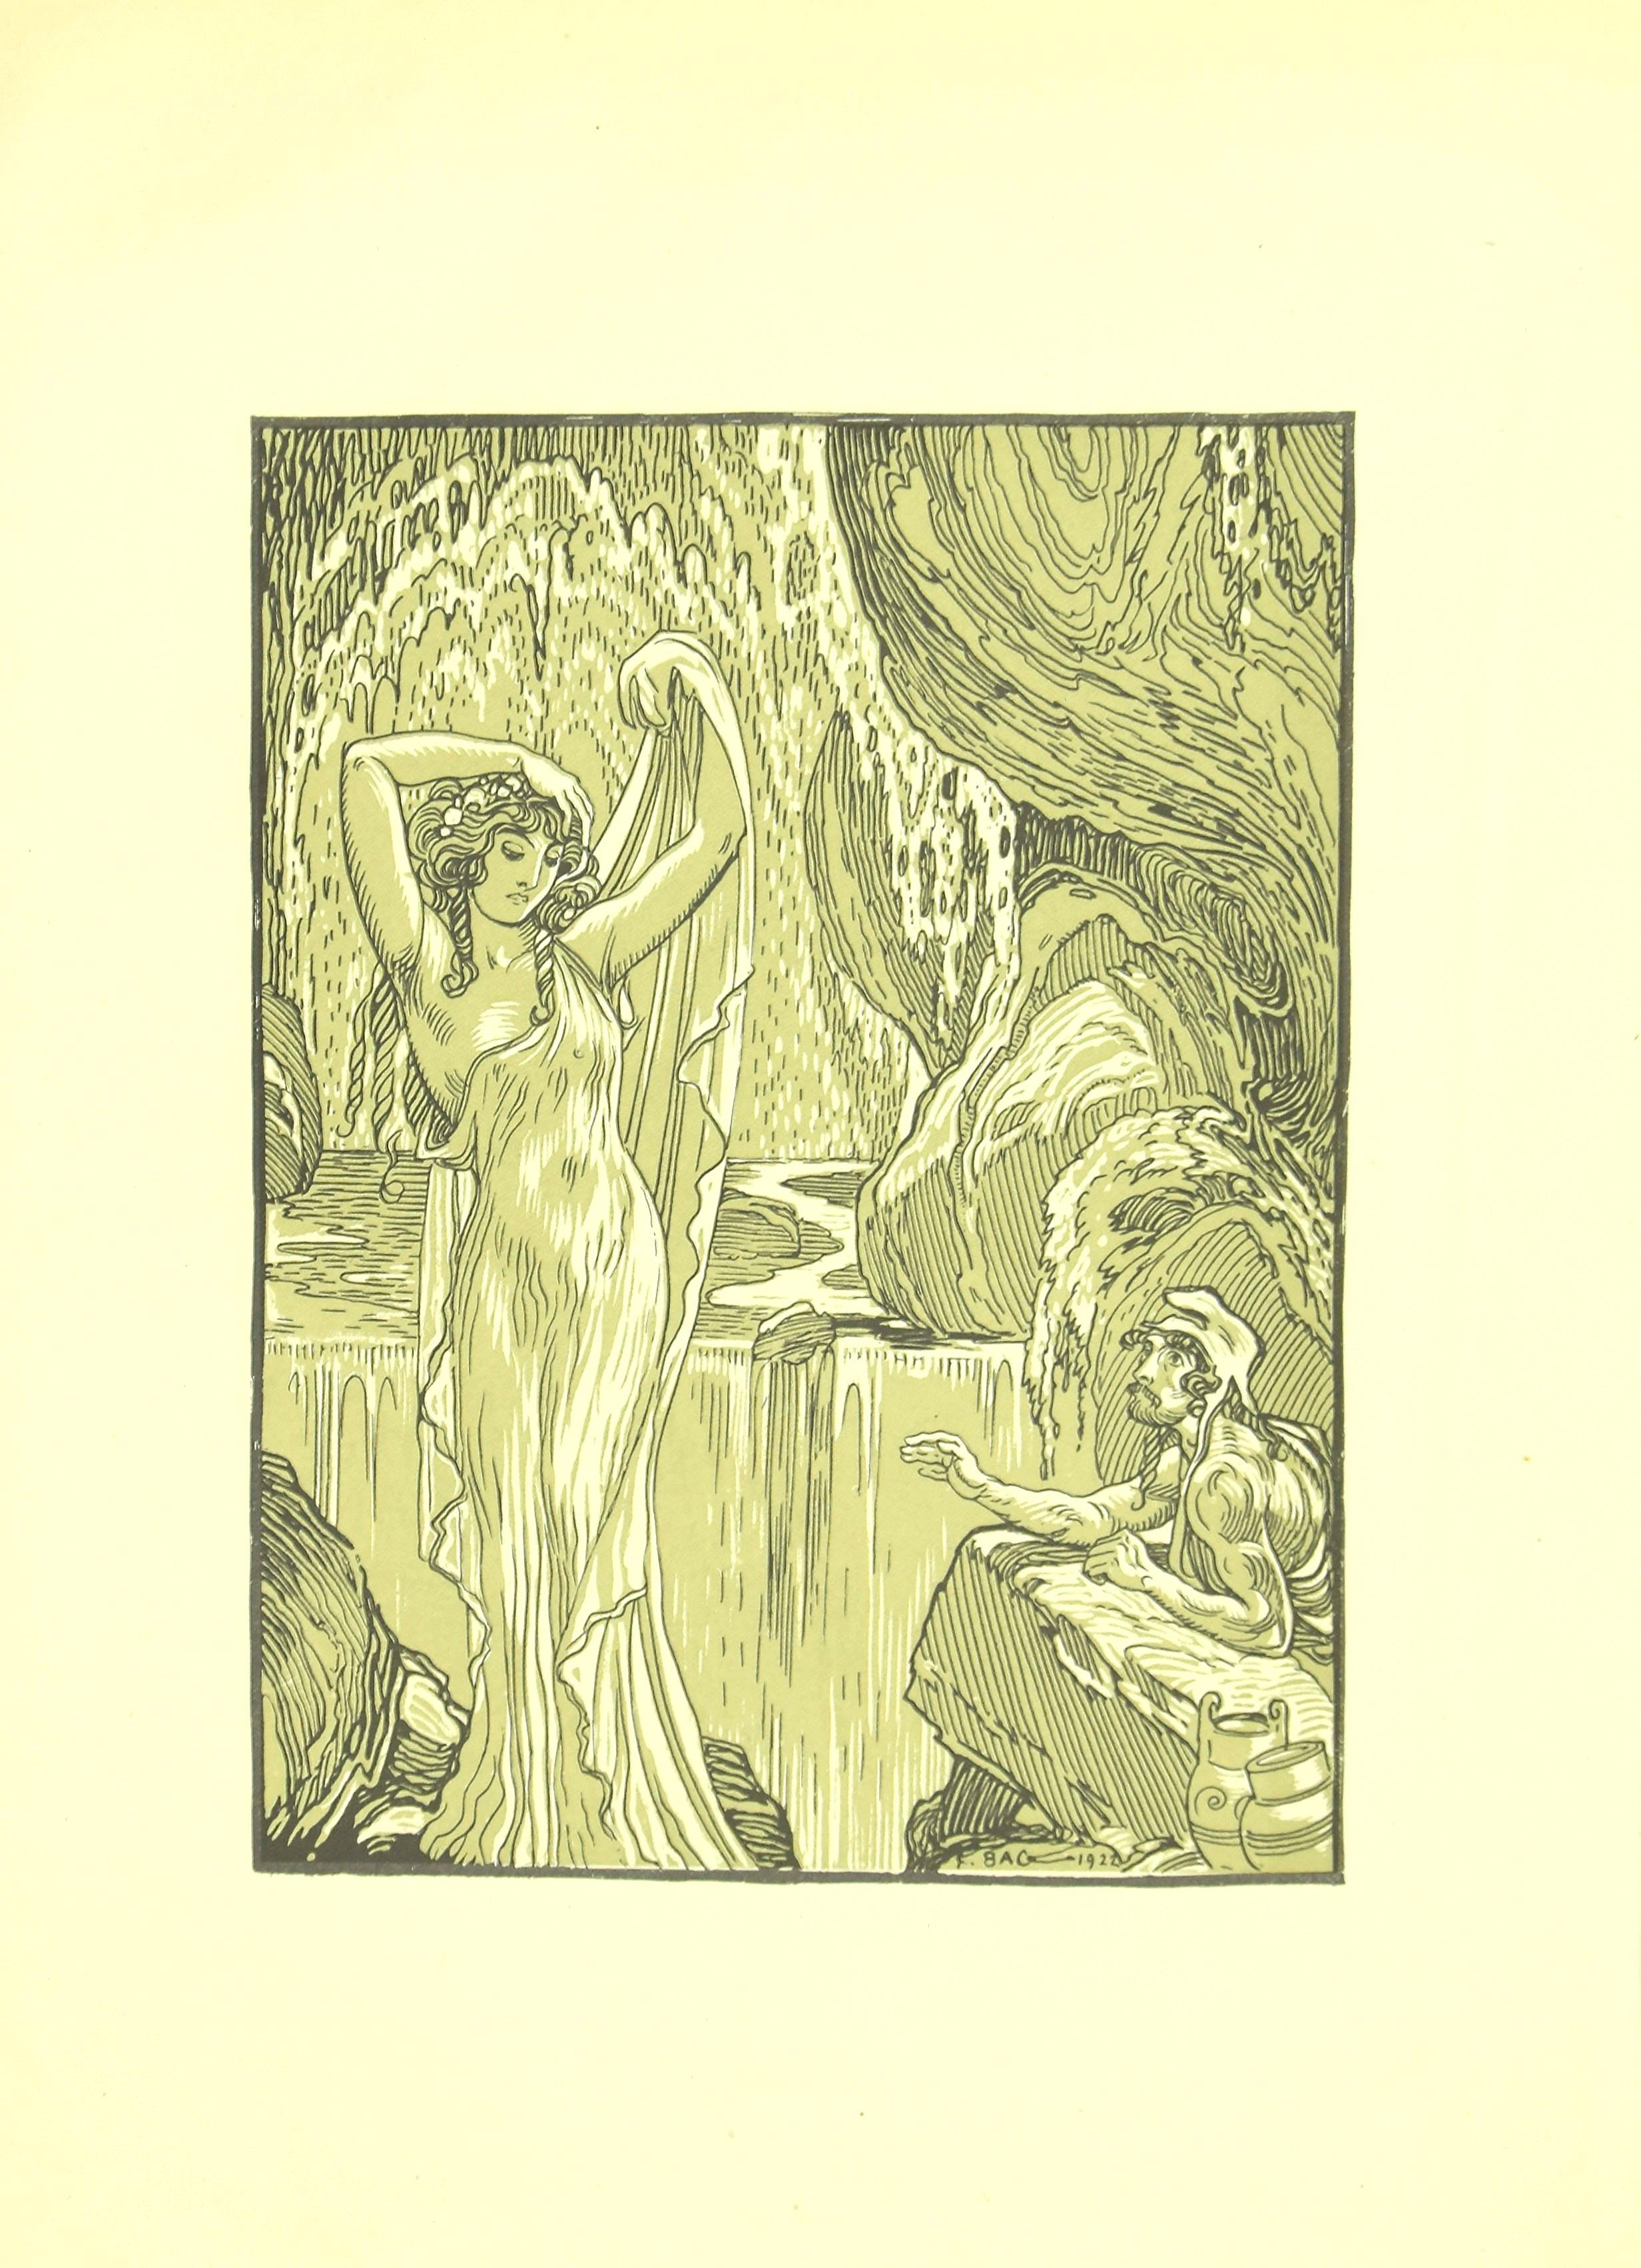 The Vestal in the Waterfall - Original Lithograph by F. Bac - 1922